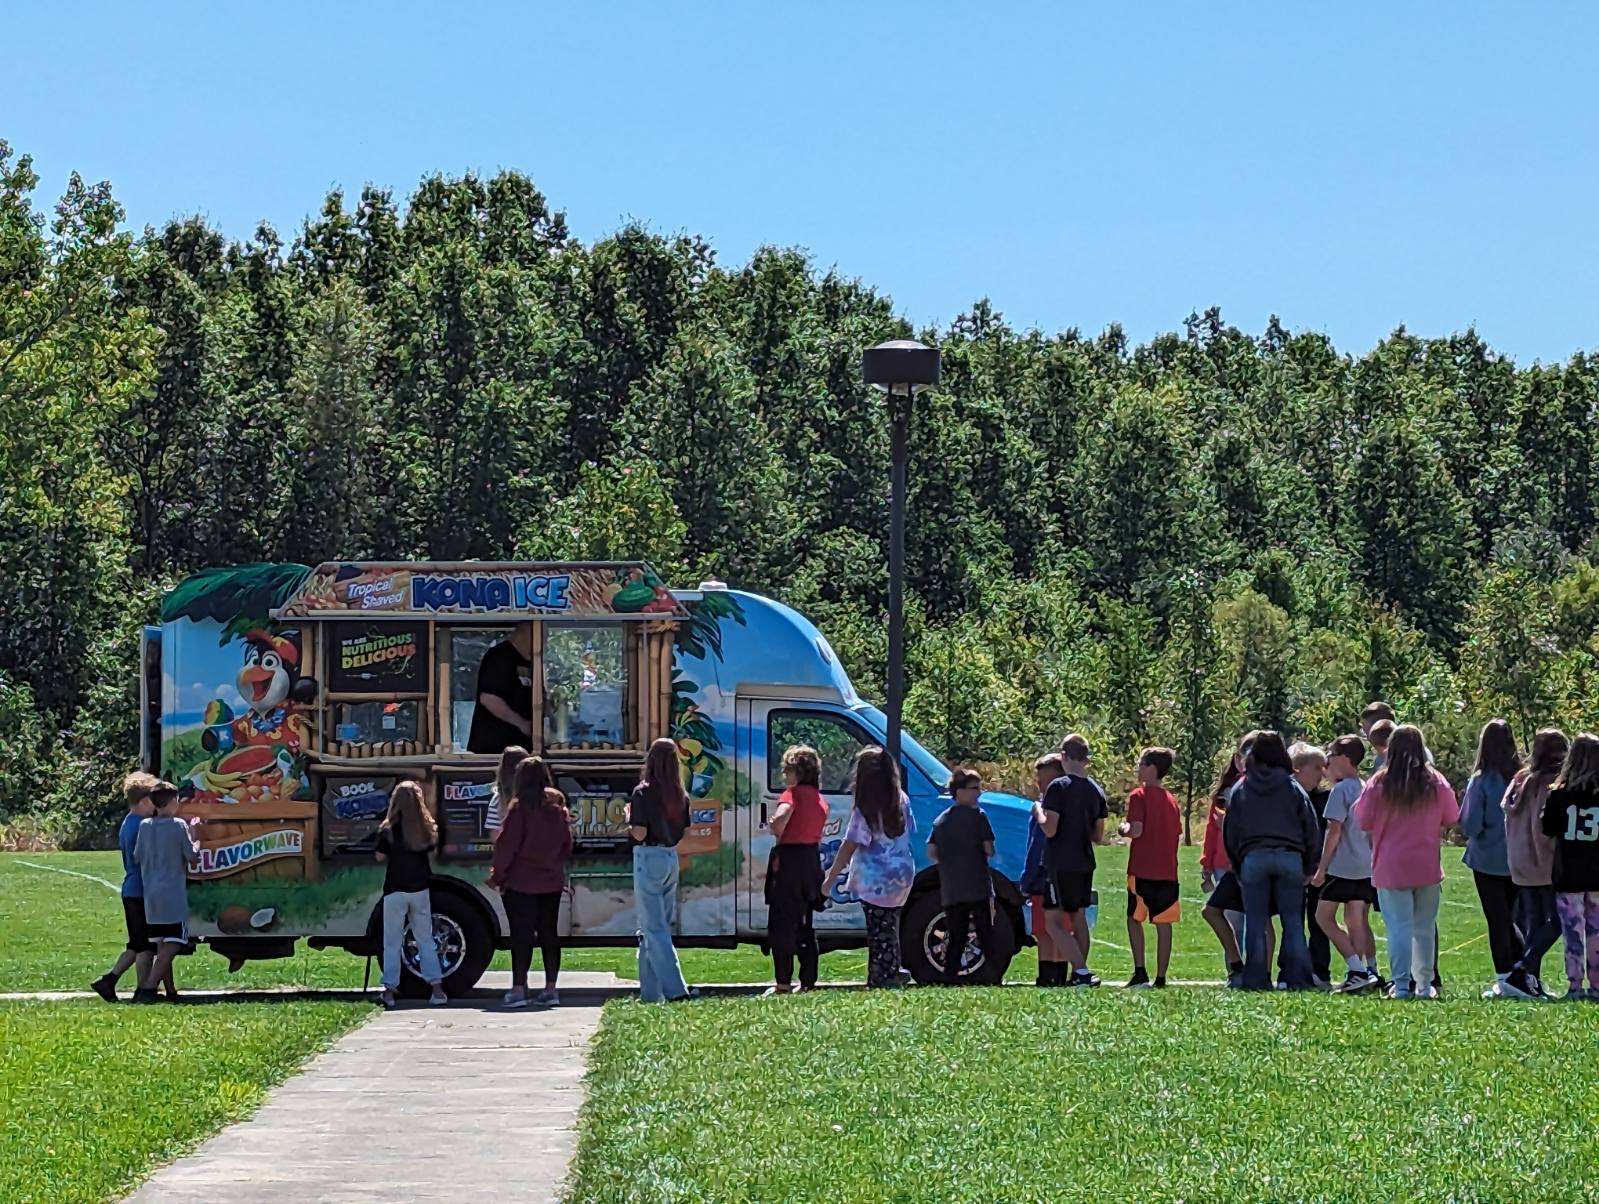 Students were treated to Kona ice and enjoyed this beautiful day!